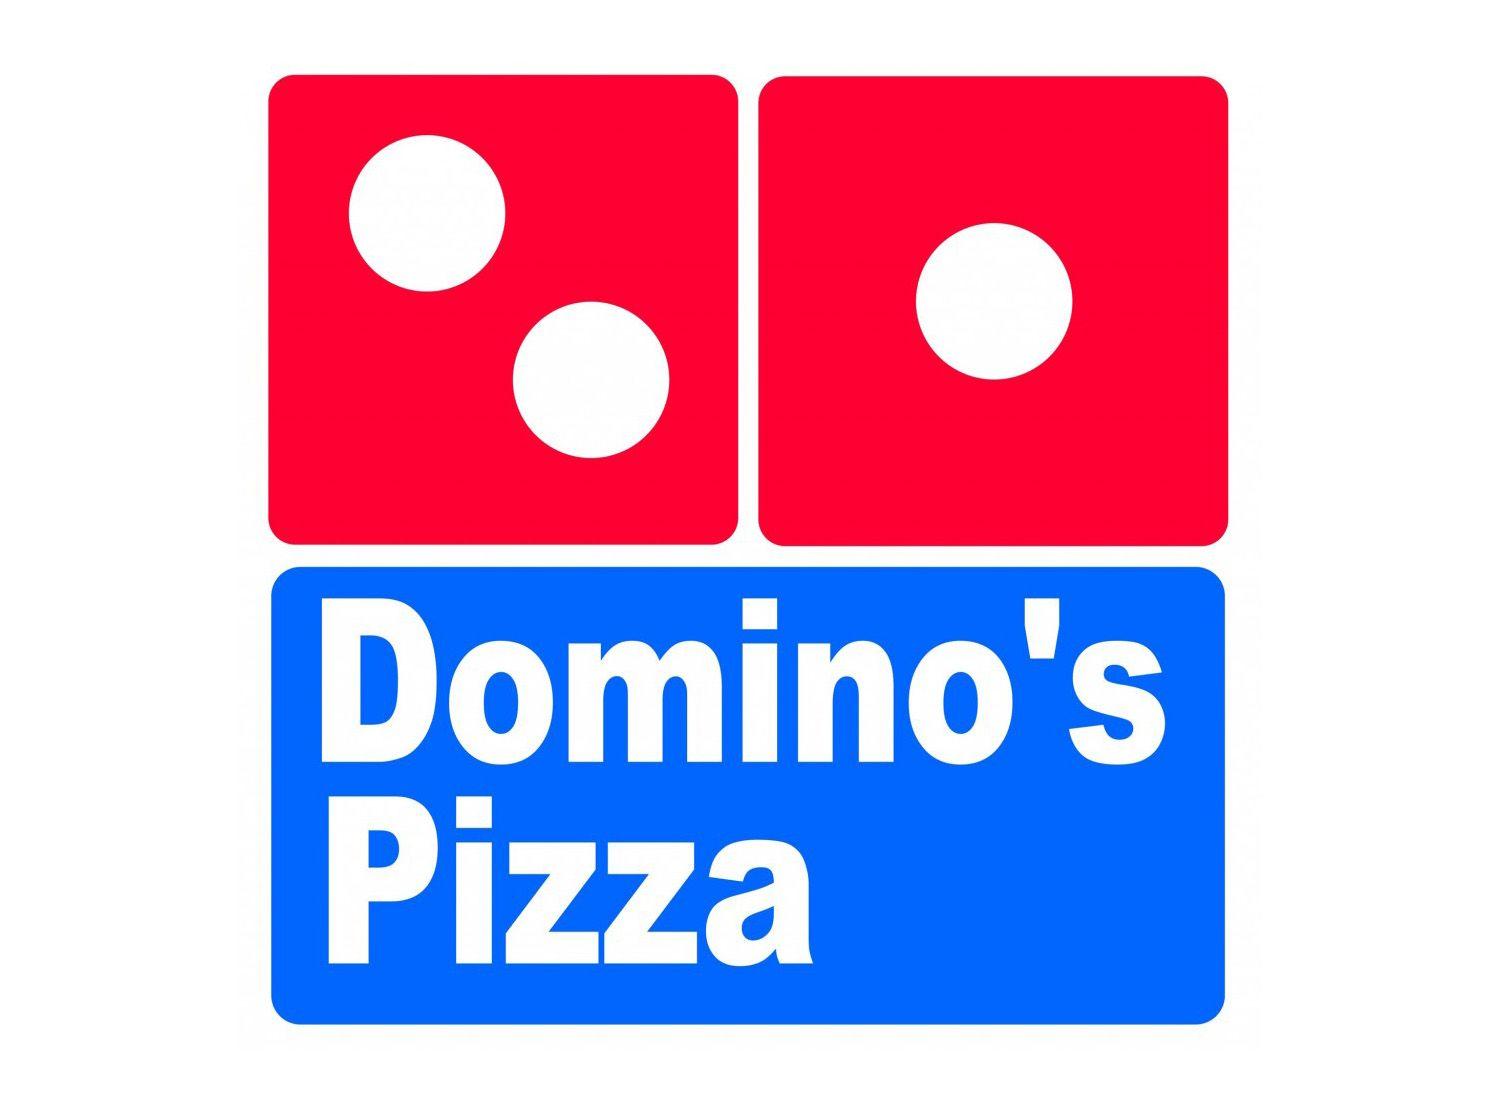 Domino's Logo - Domino's Logo, Domino's Symbol, Meaning, History and Evolution